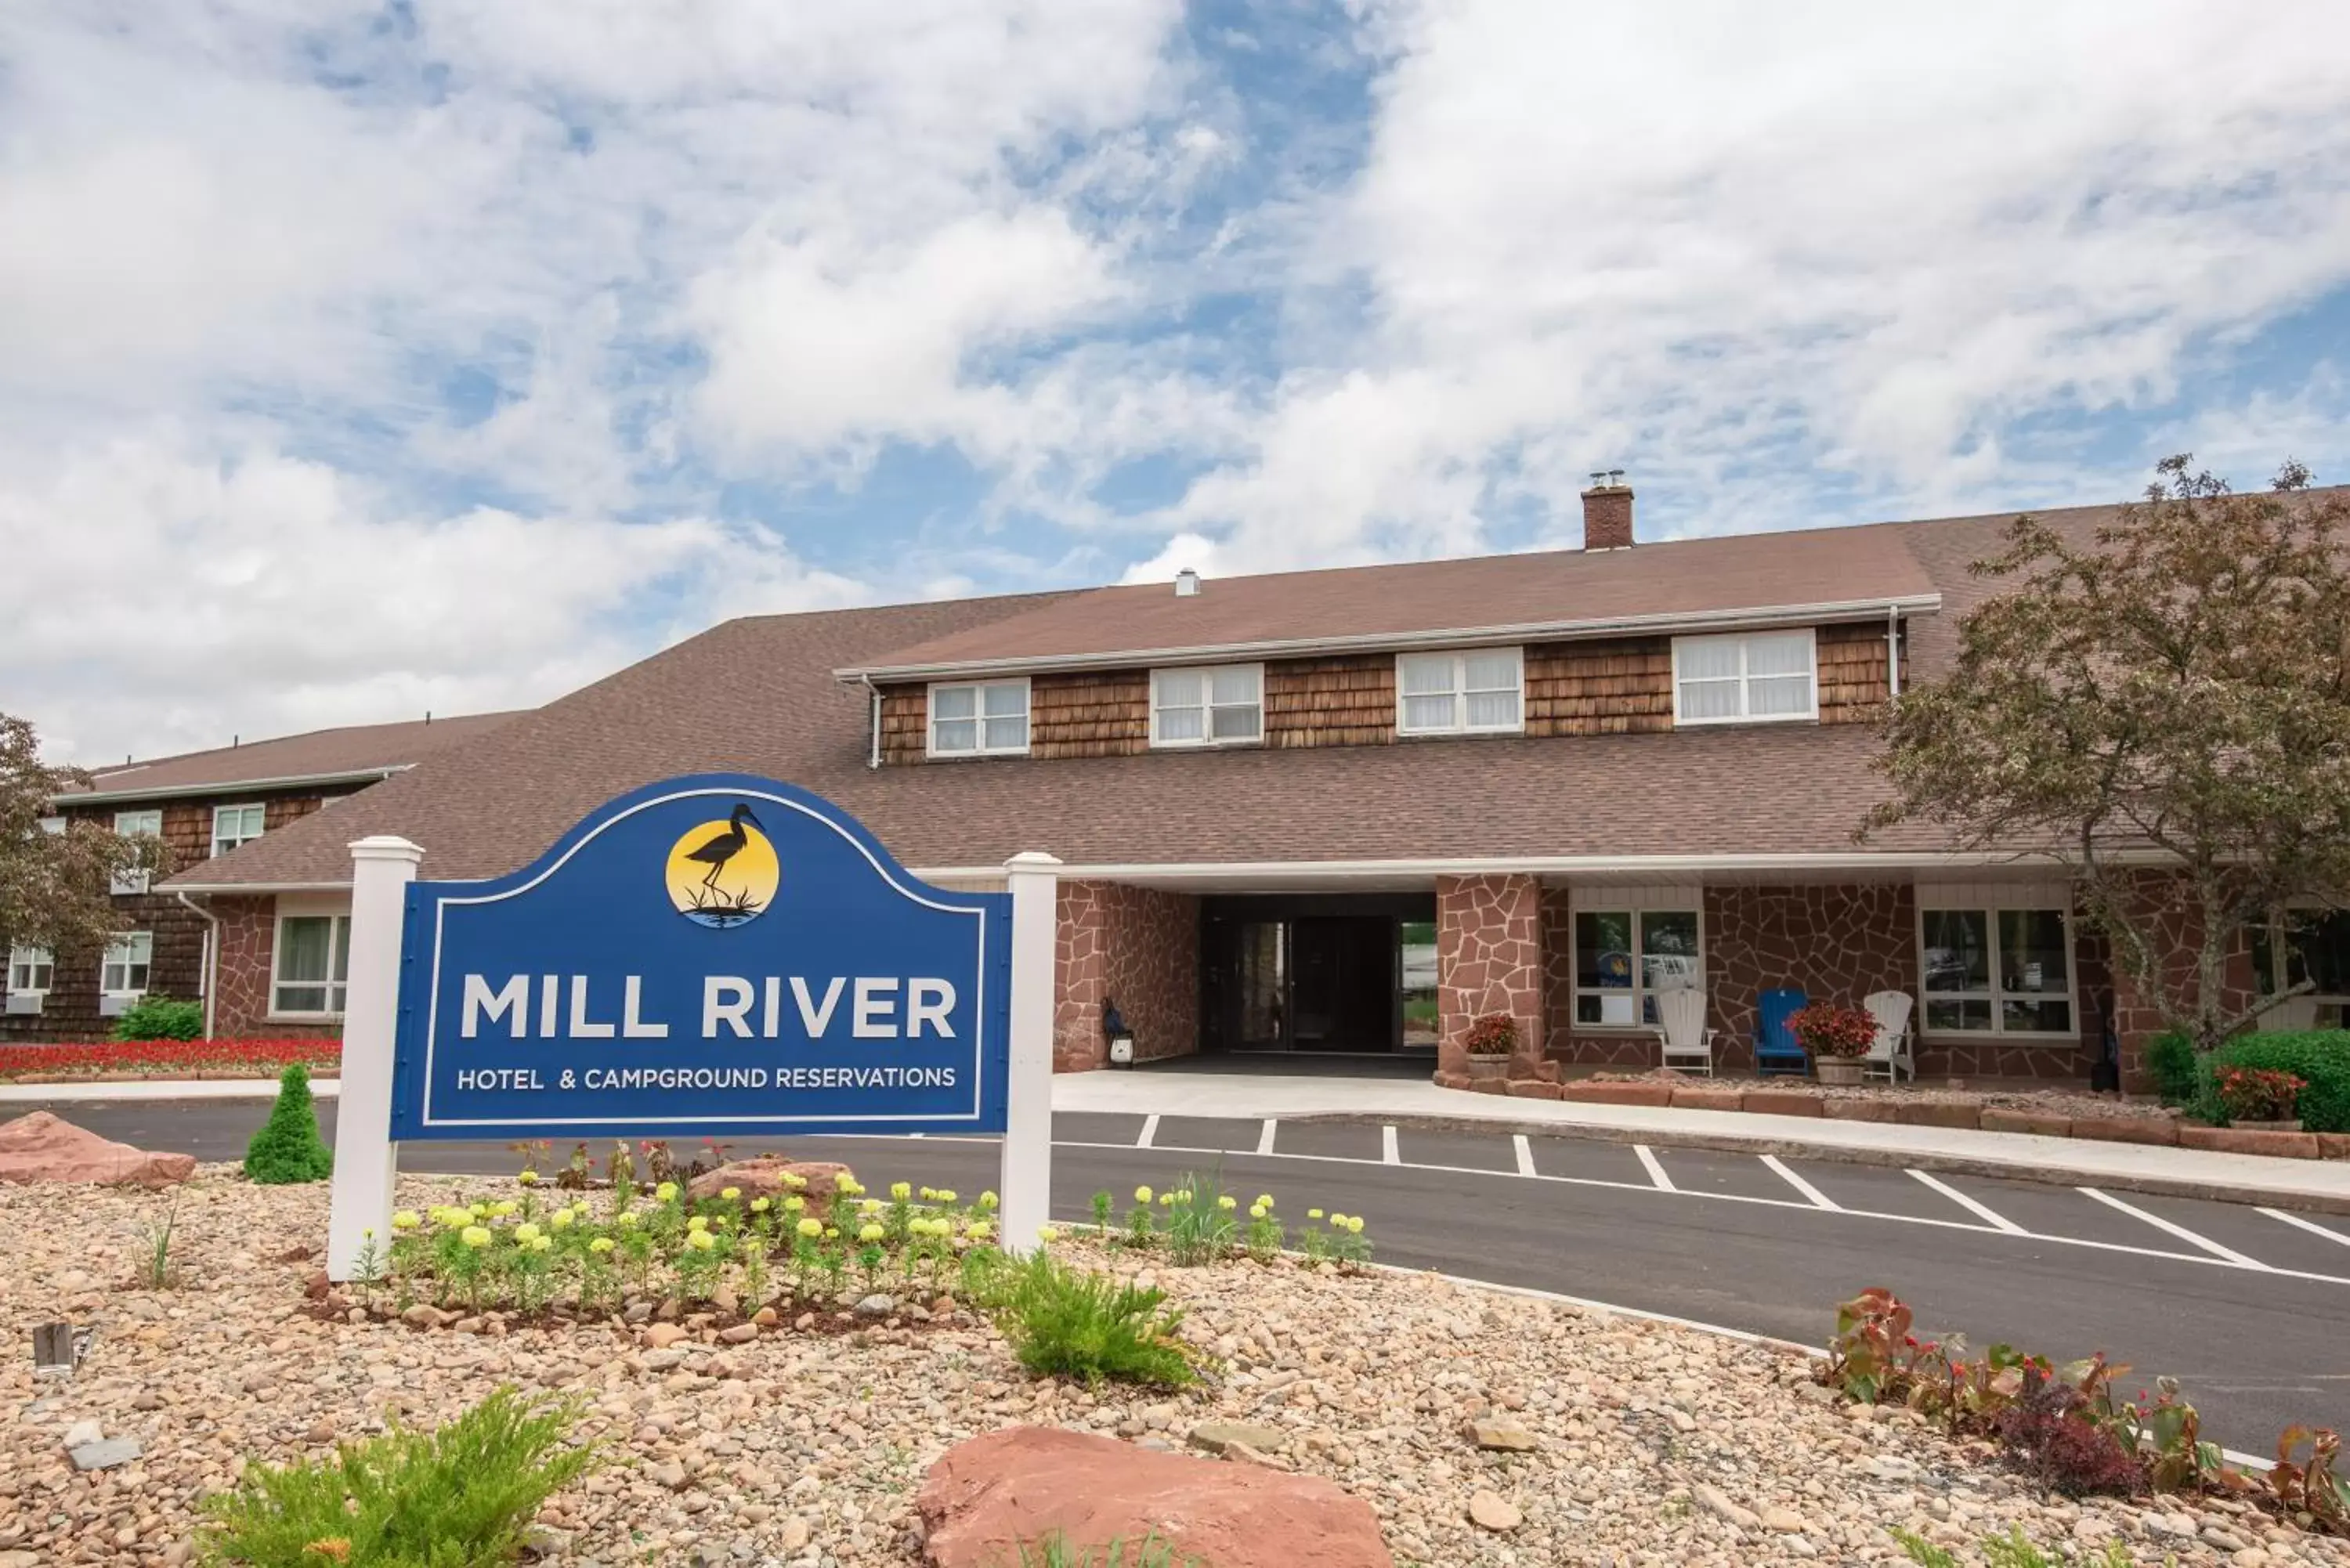 Property Building in Mill River Resort